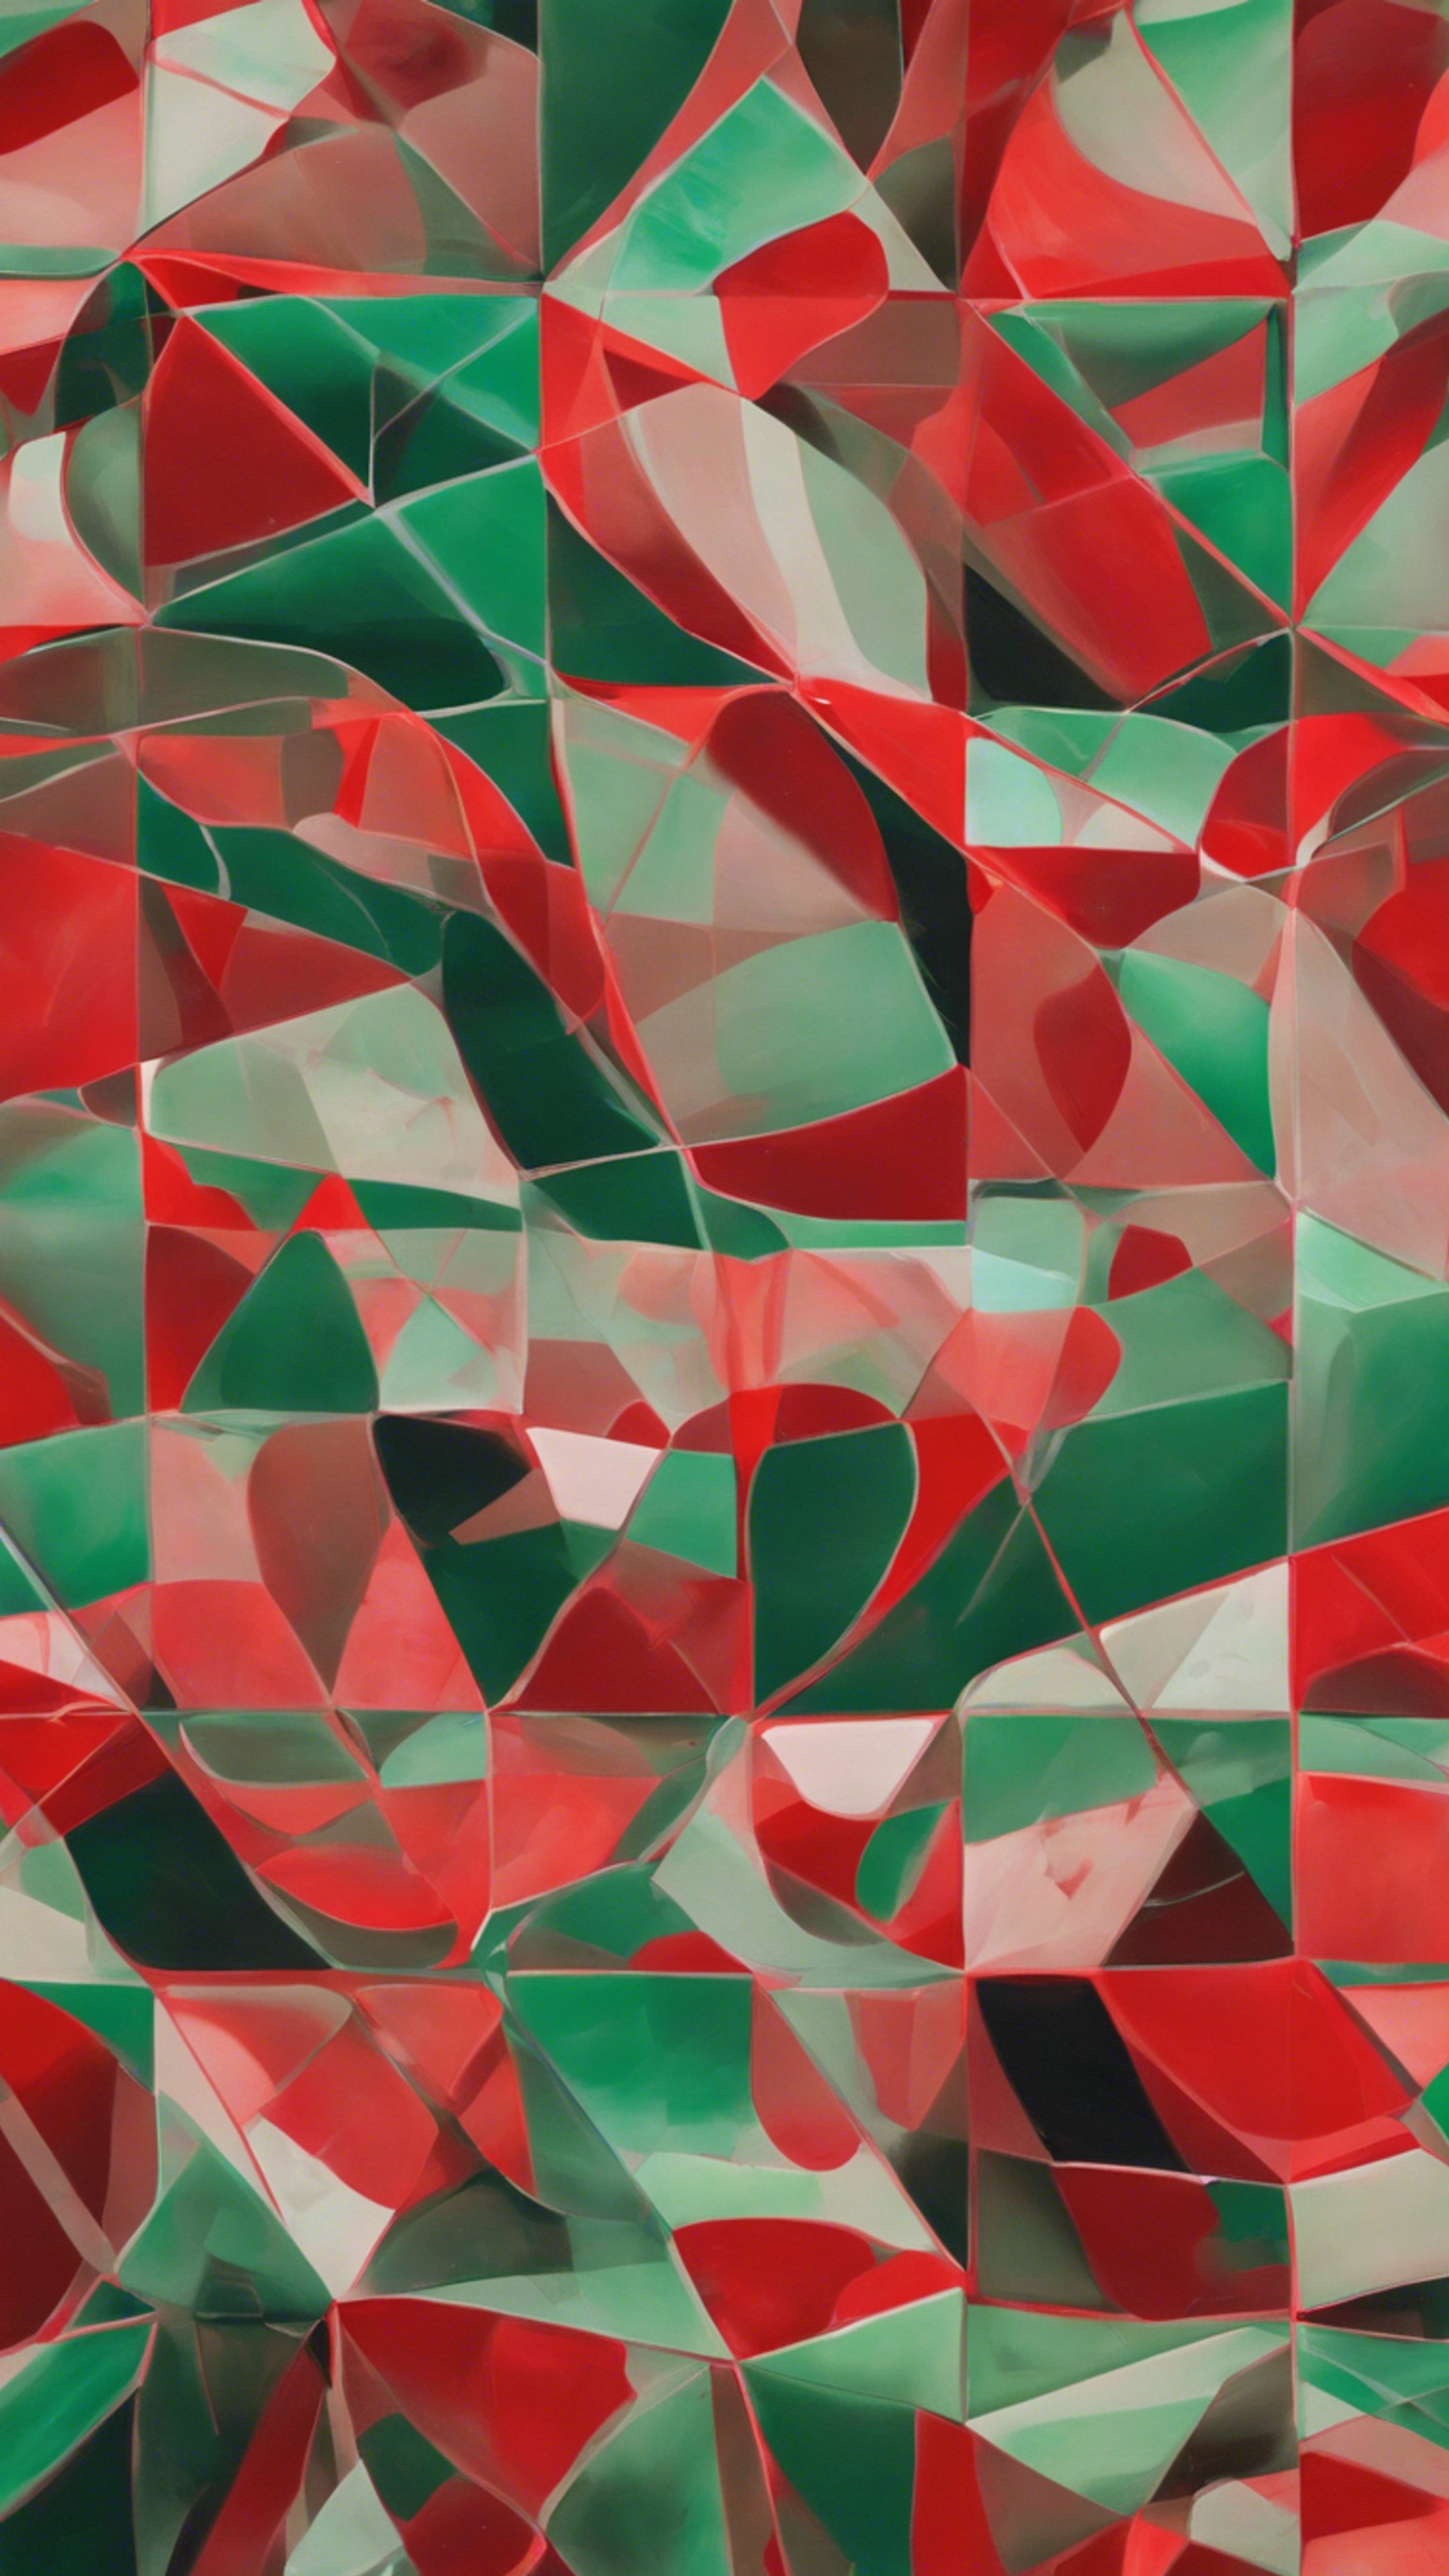 A modernist painting of red and green geometrical shapes, seamless in their connection 벽지[cfa3acf637214e6a9239]